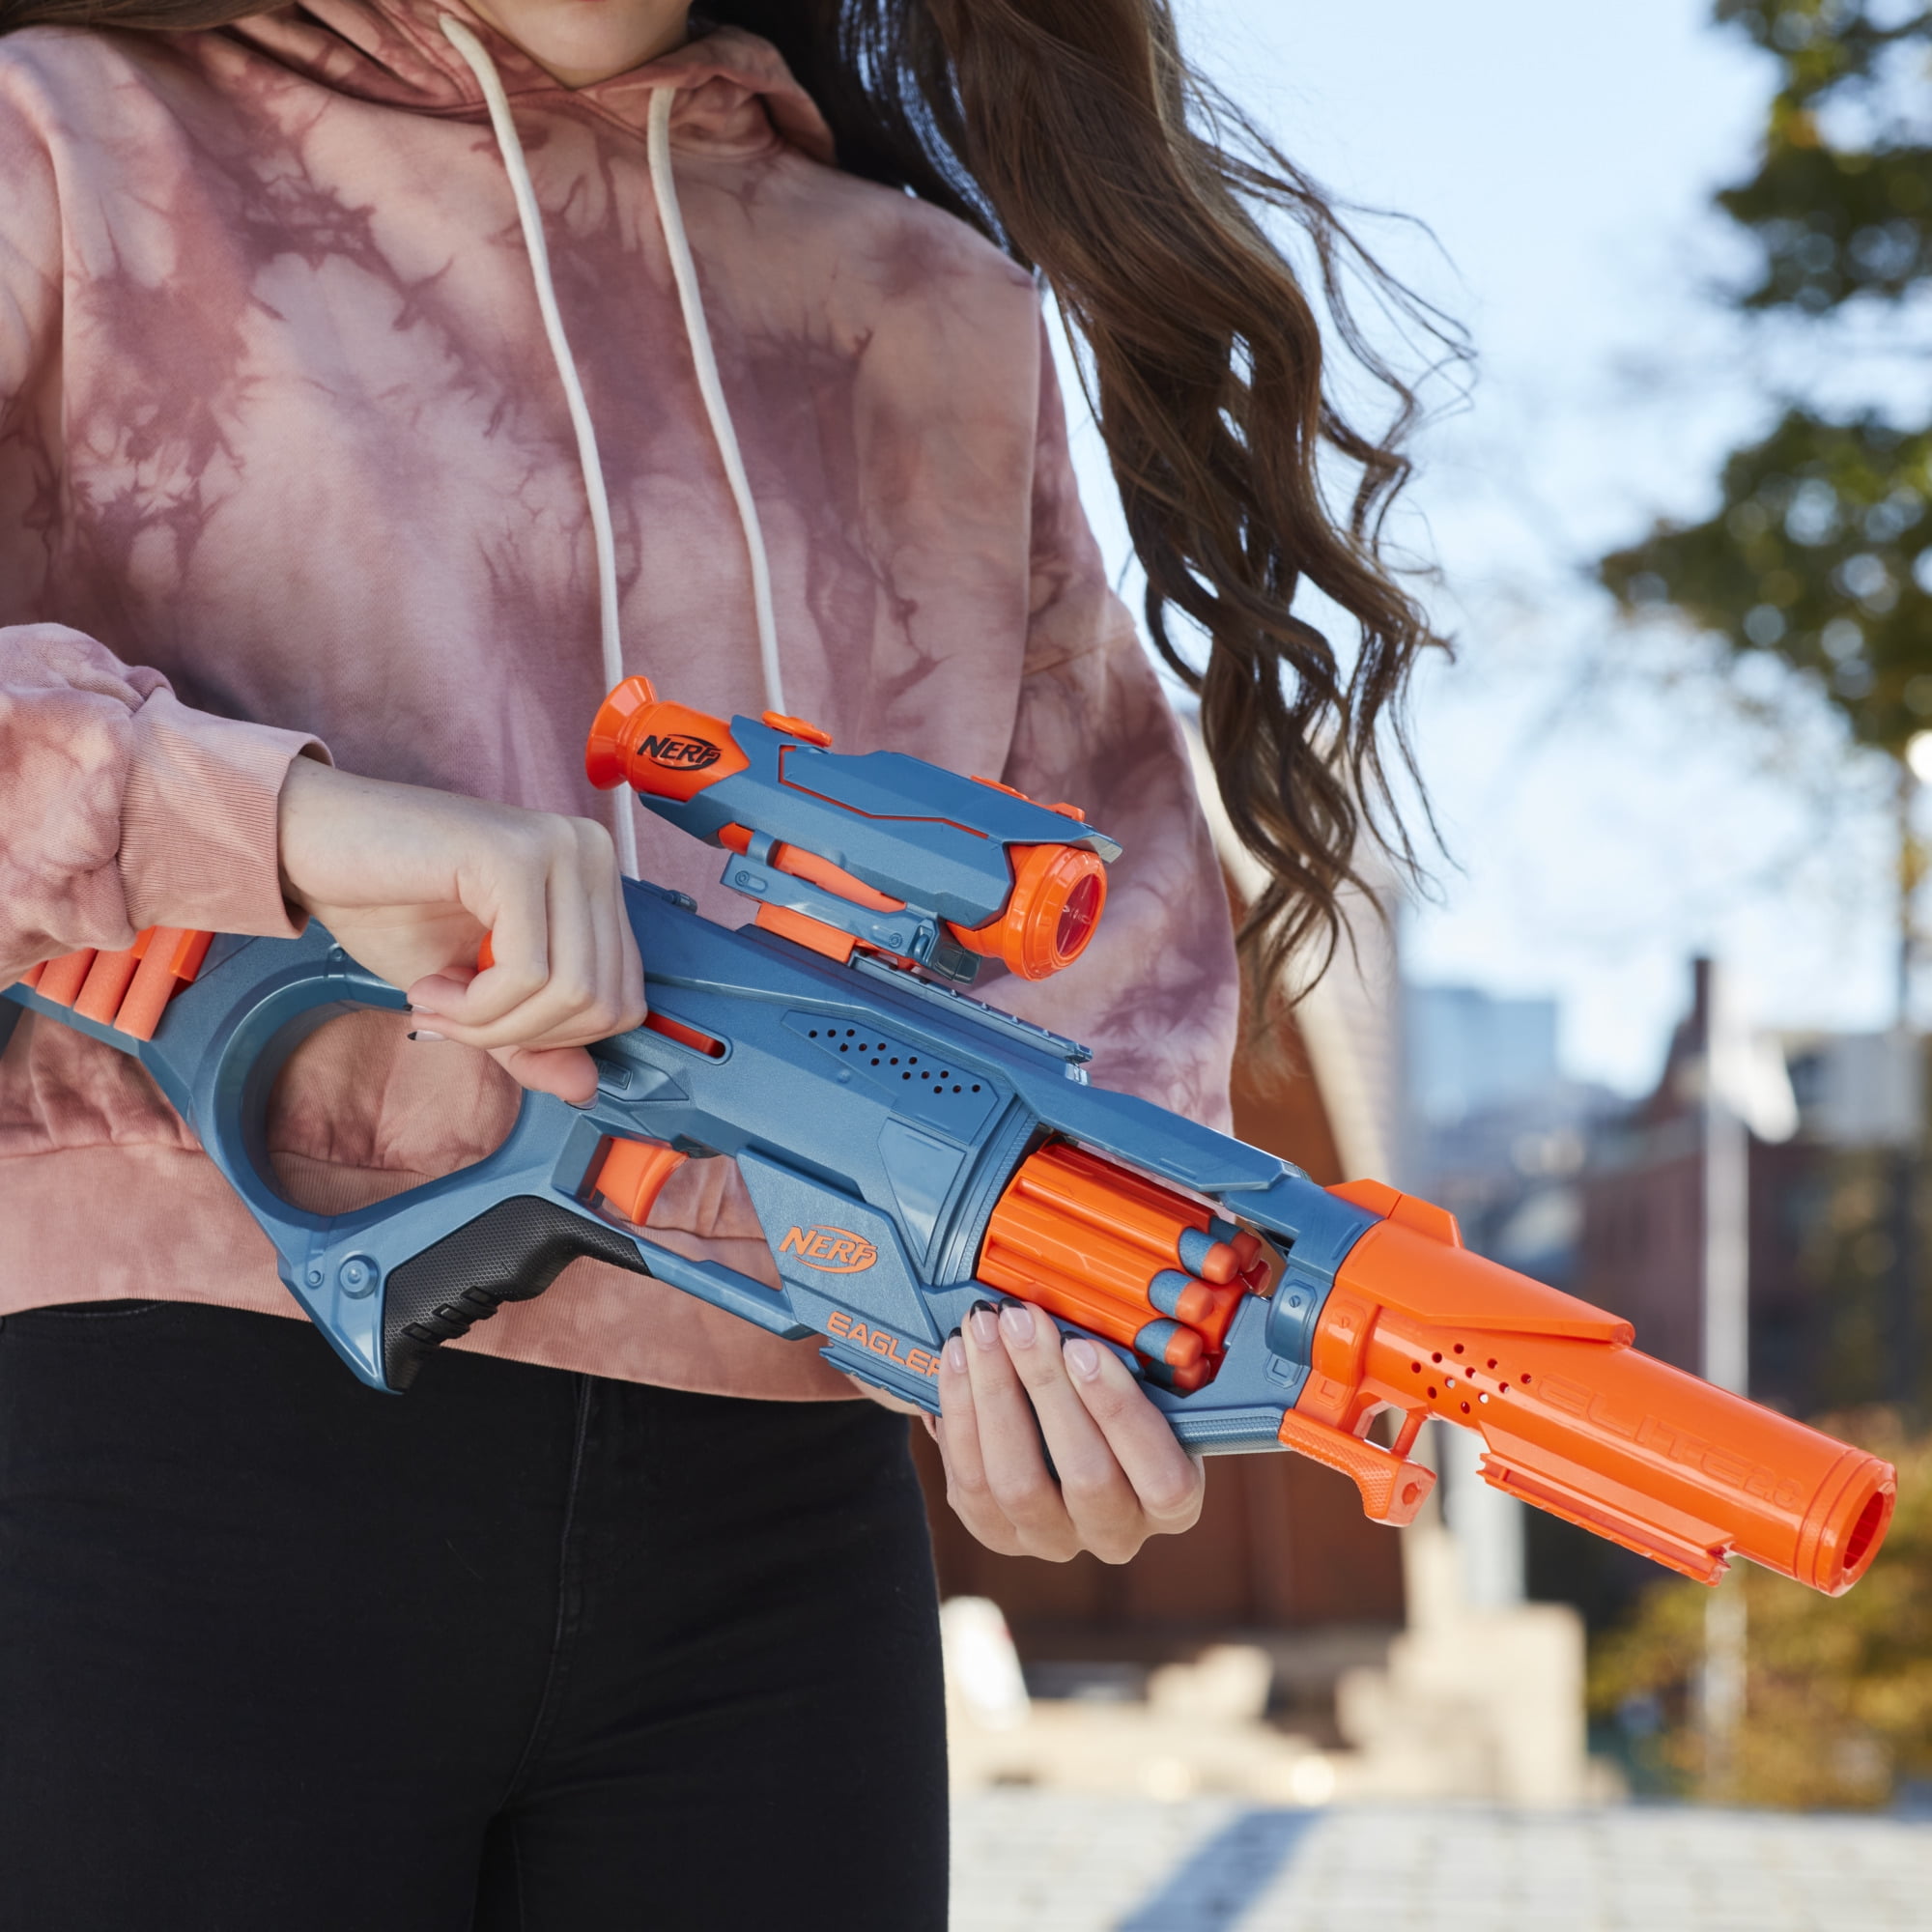 Nerf Elite 2.0 Eaglepoint RD-8 with Detachable Scope Hasbro💥NEW💥